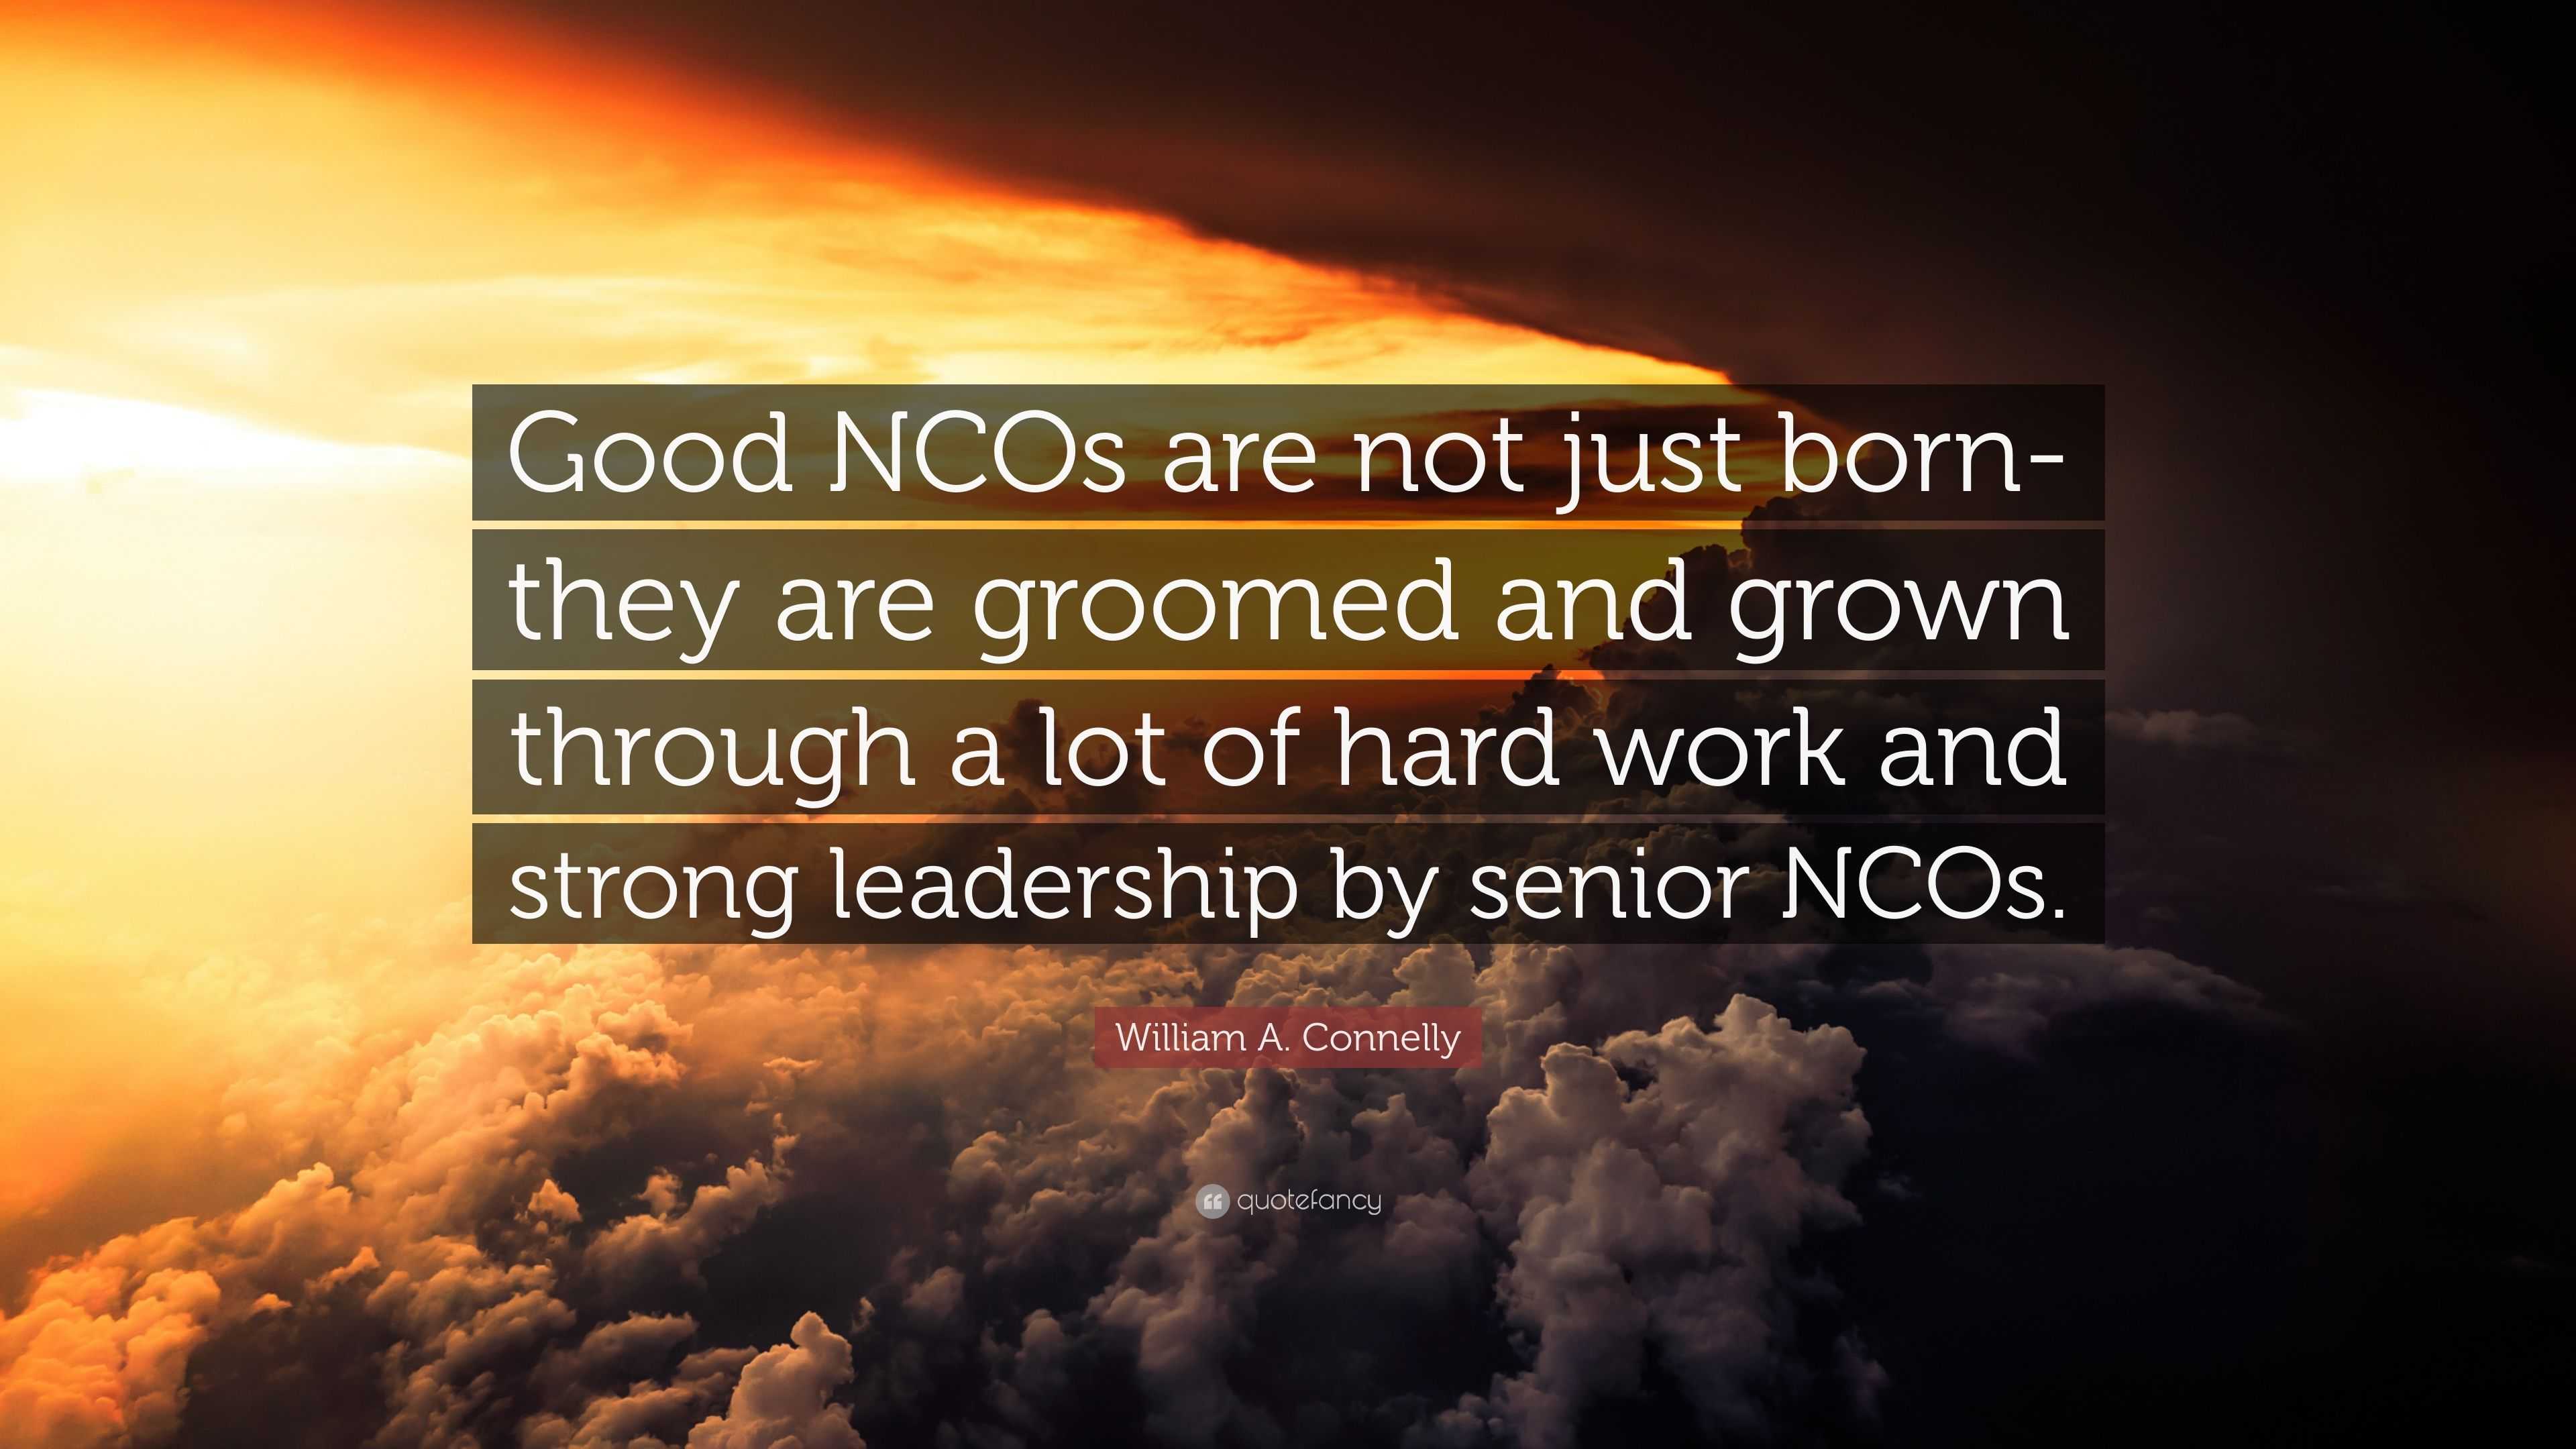 William A. Connelly Quote: “Good NCOs are not just born-they are